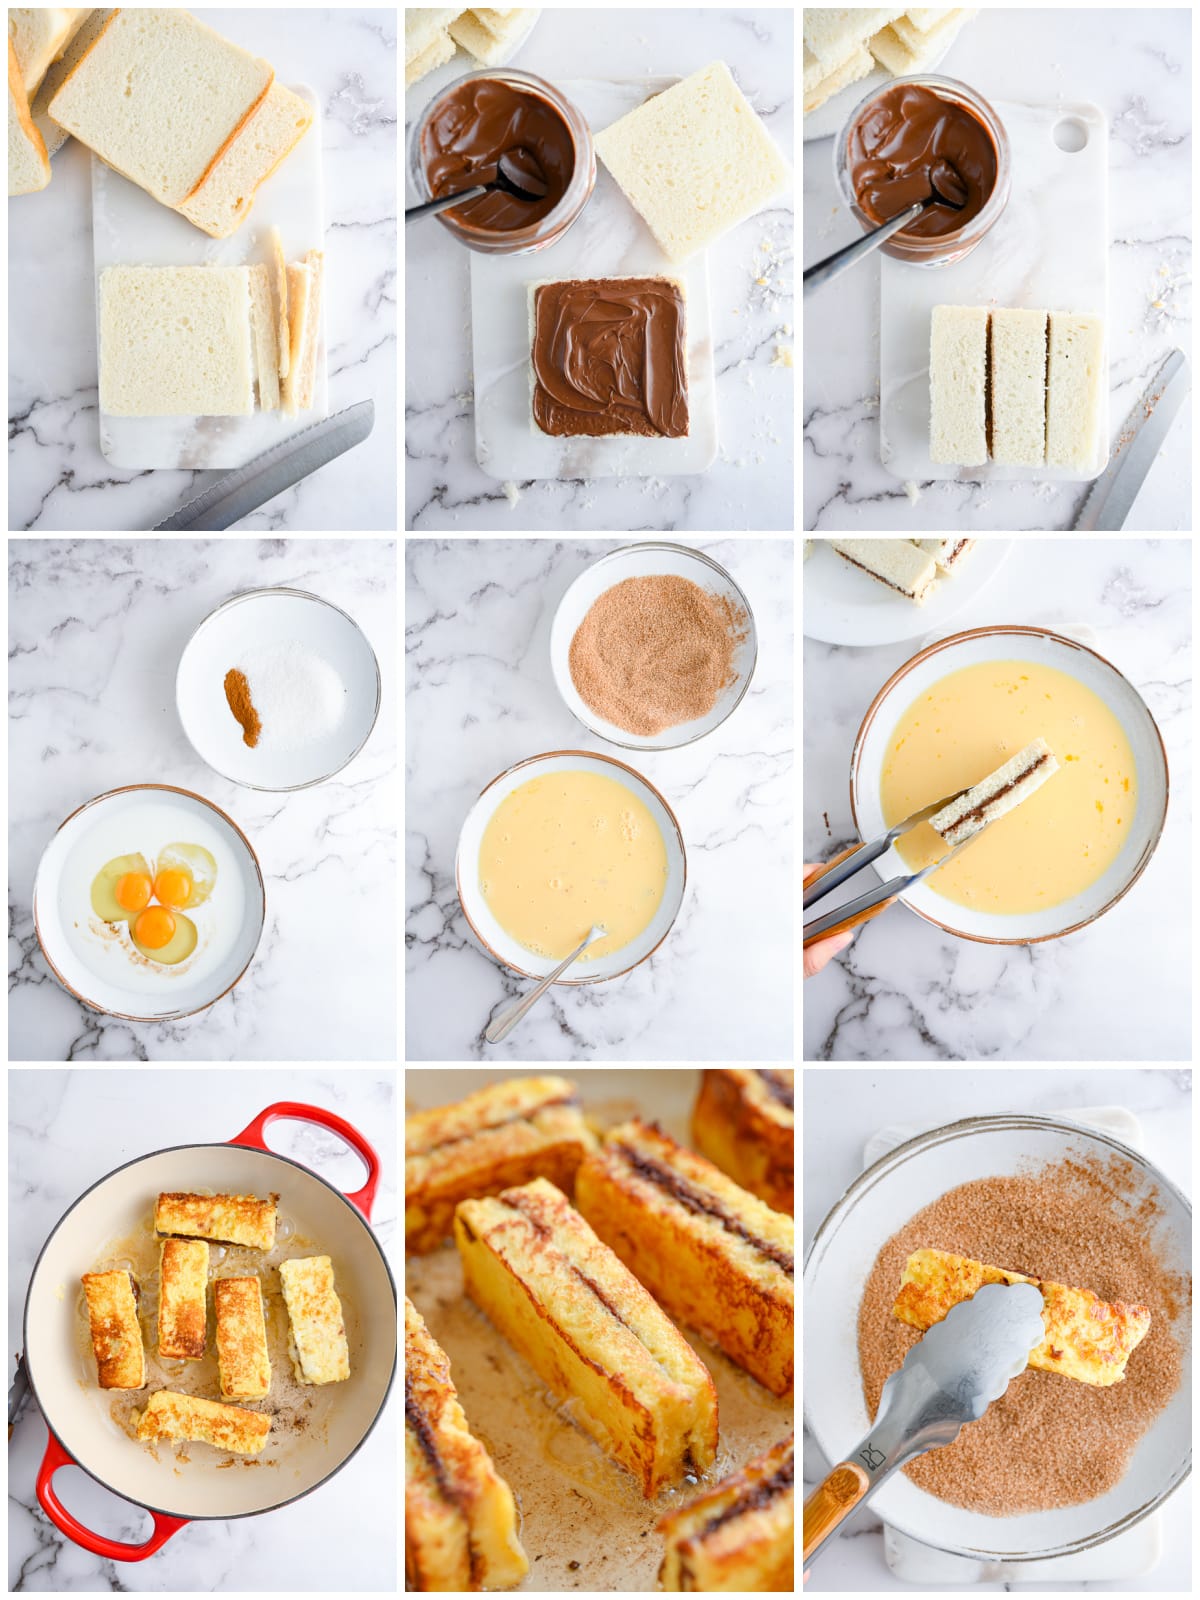 Step by step photos on how to make Nutella French Toast Sticks.